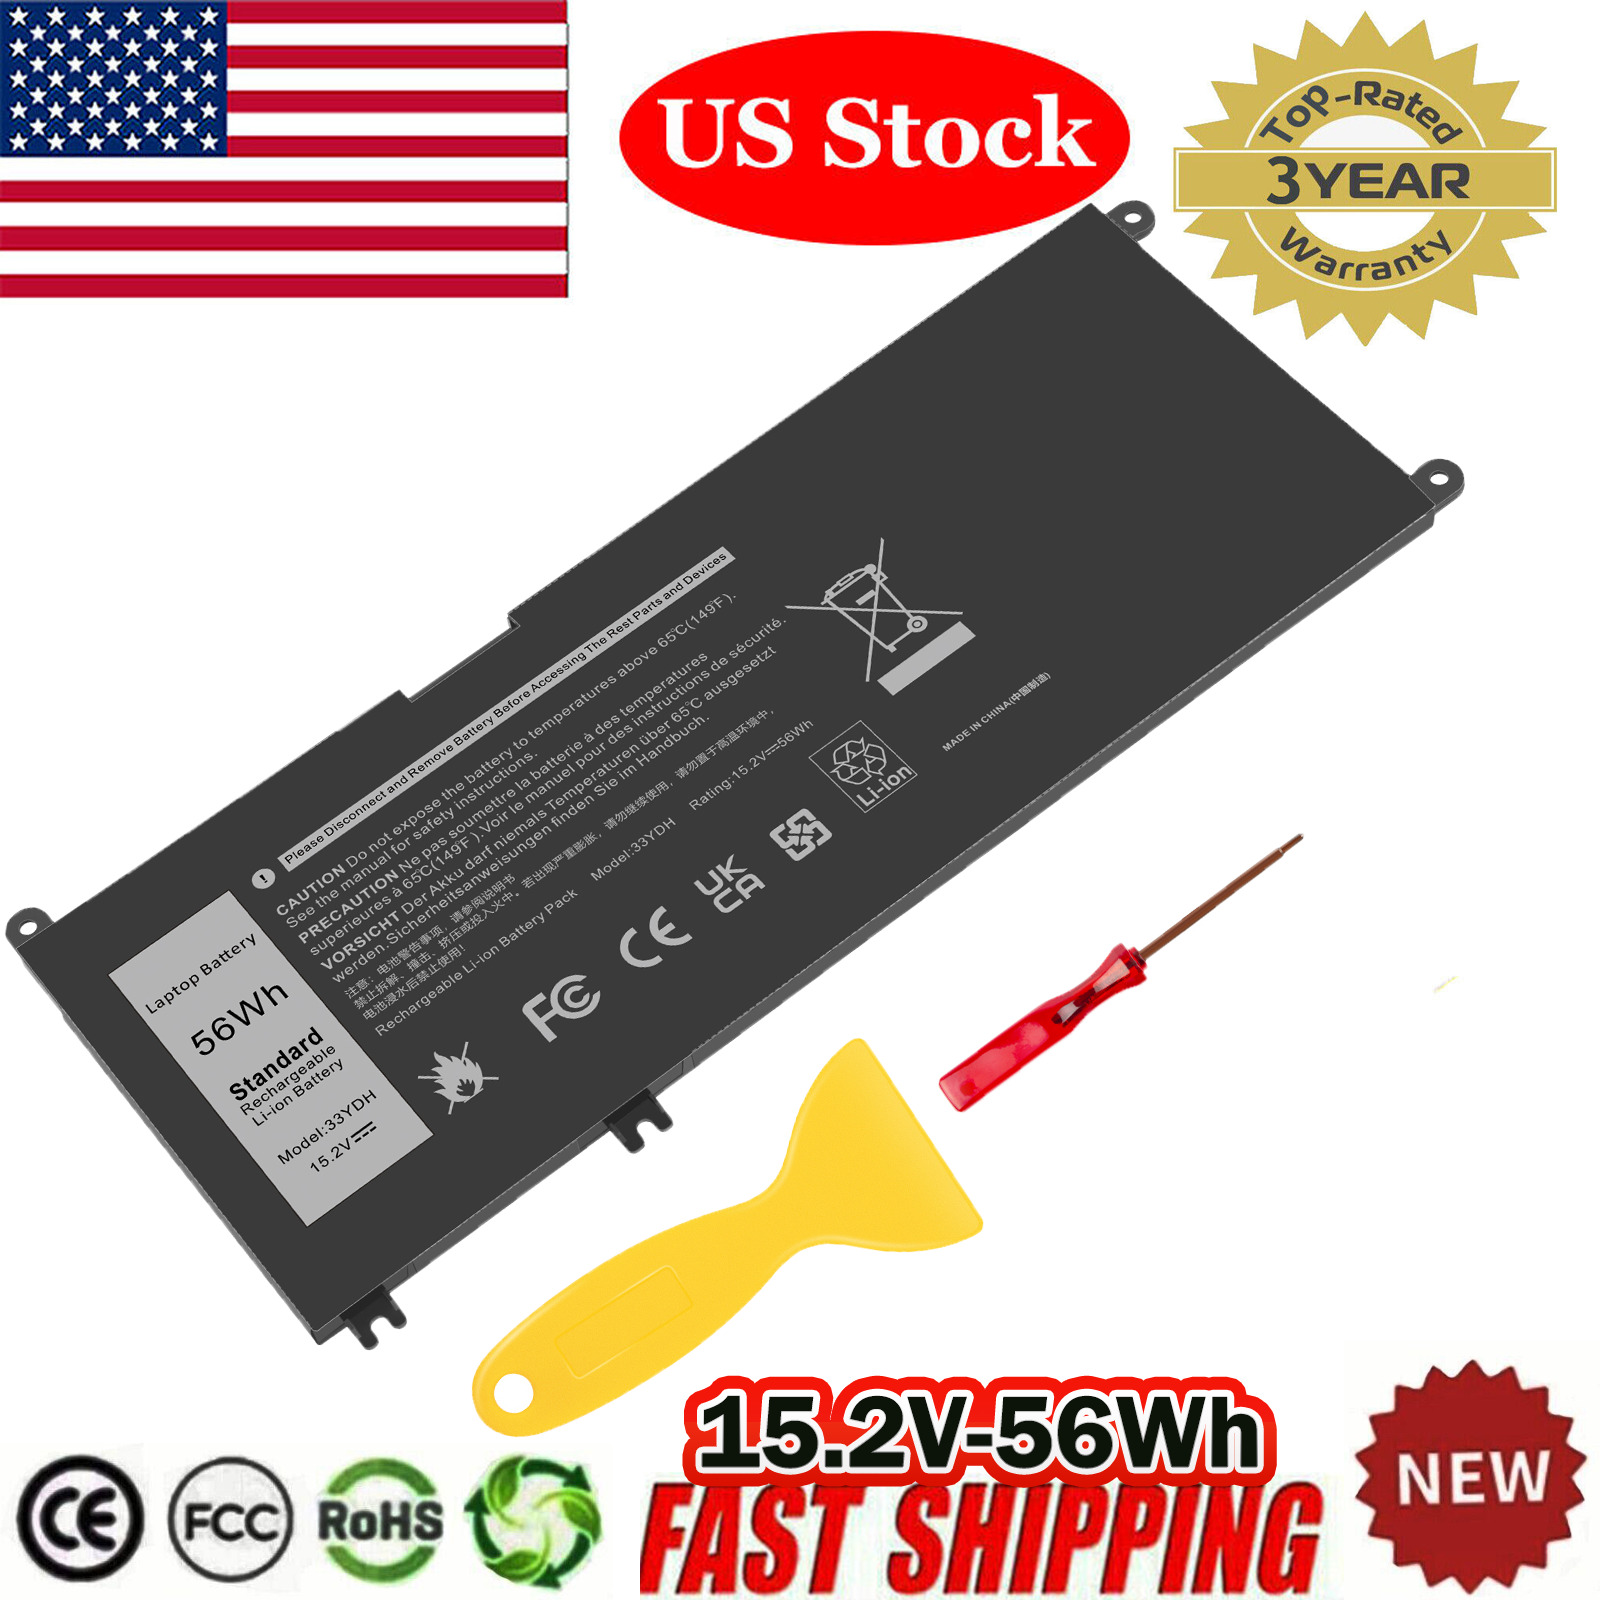 33YDH Battery for Dell Latitude 3380 3480 3490 3580 3590 Inspiron 7577 56Wh